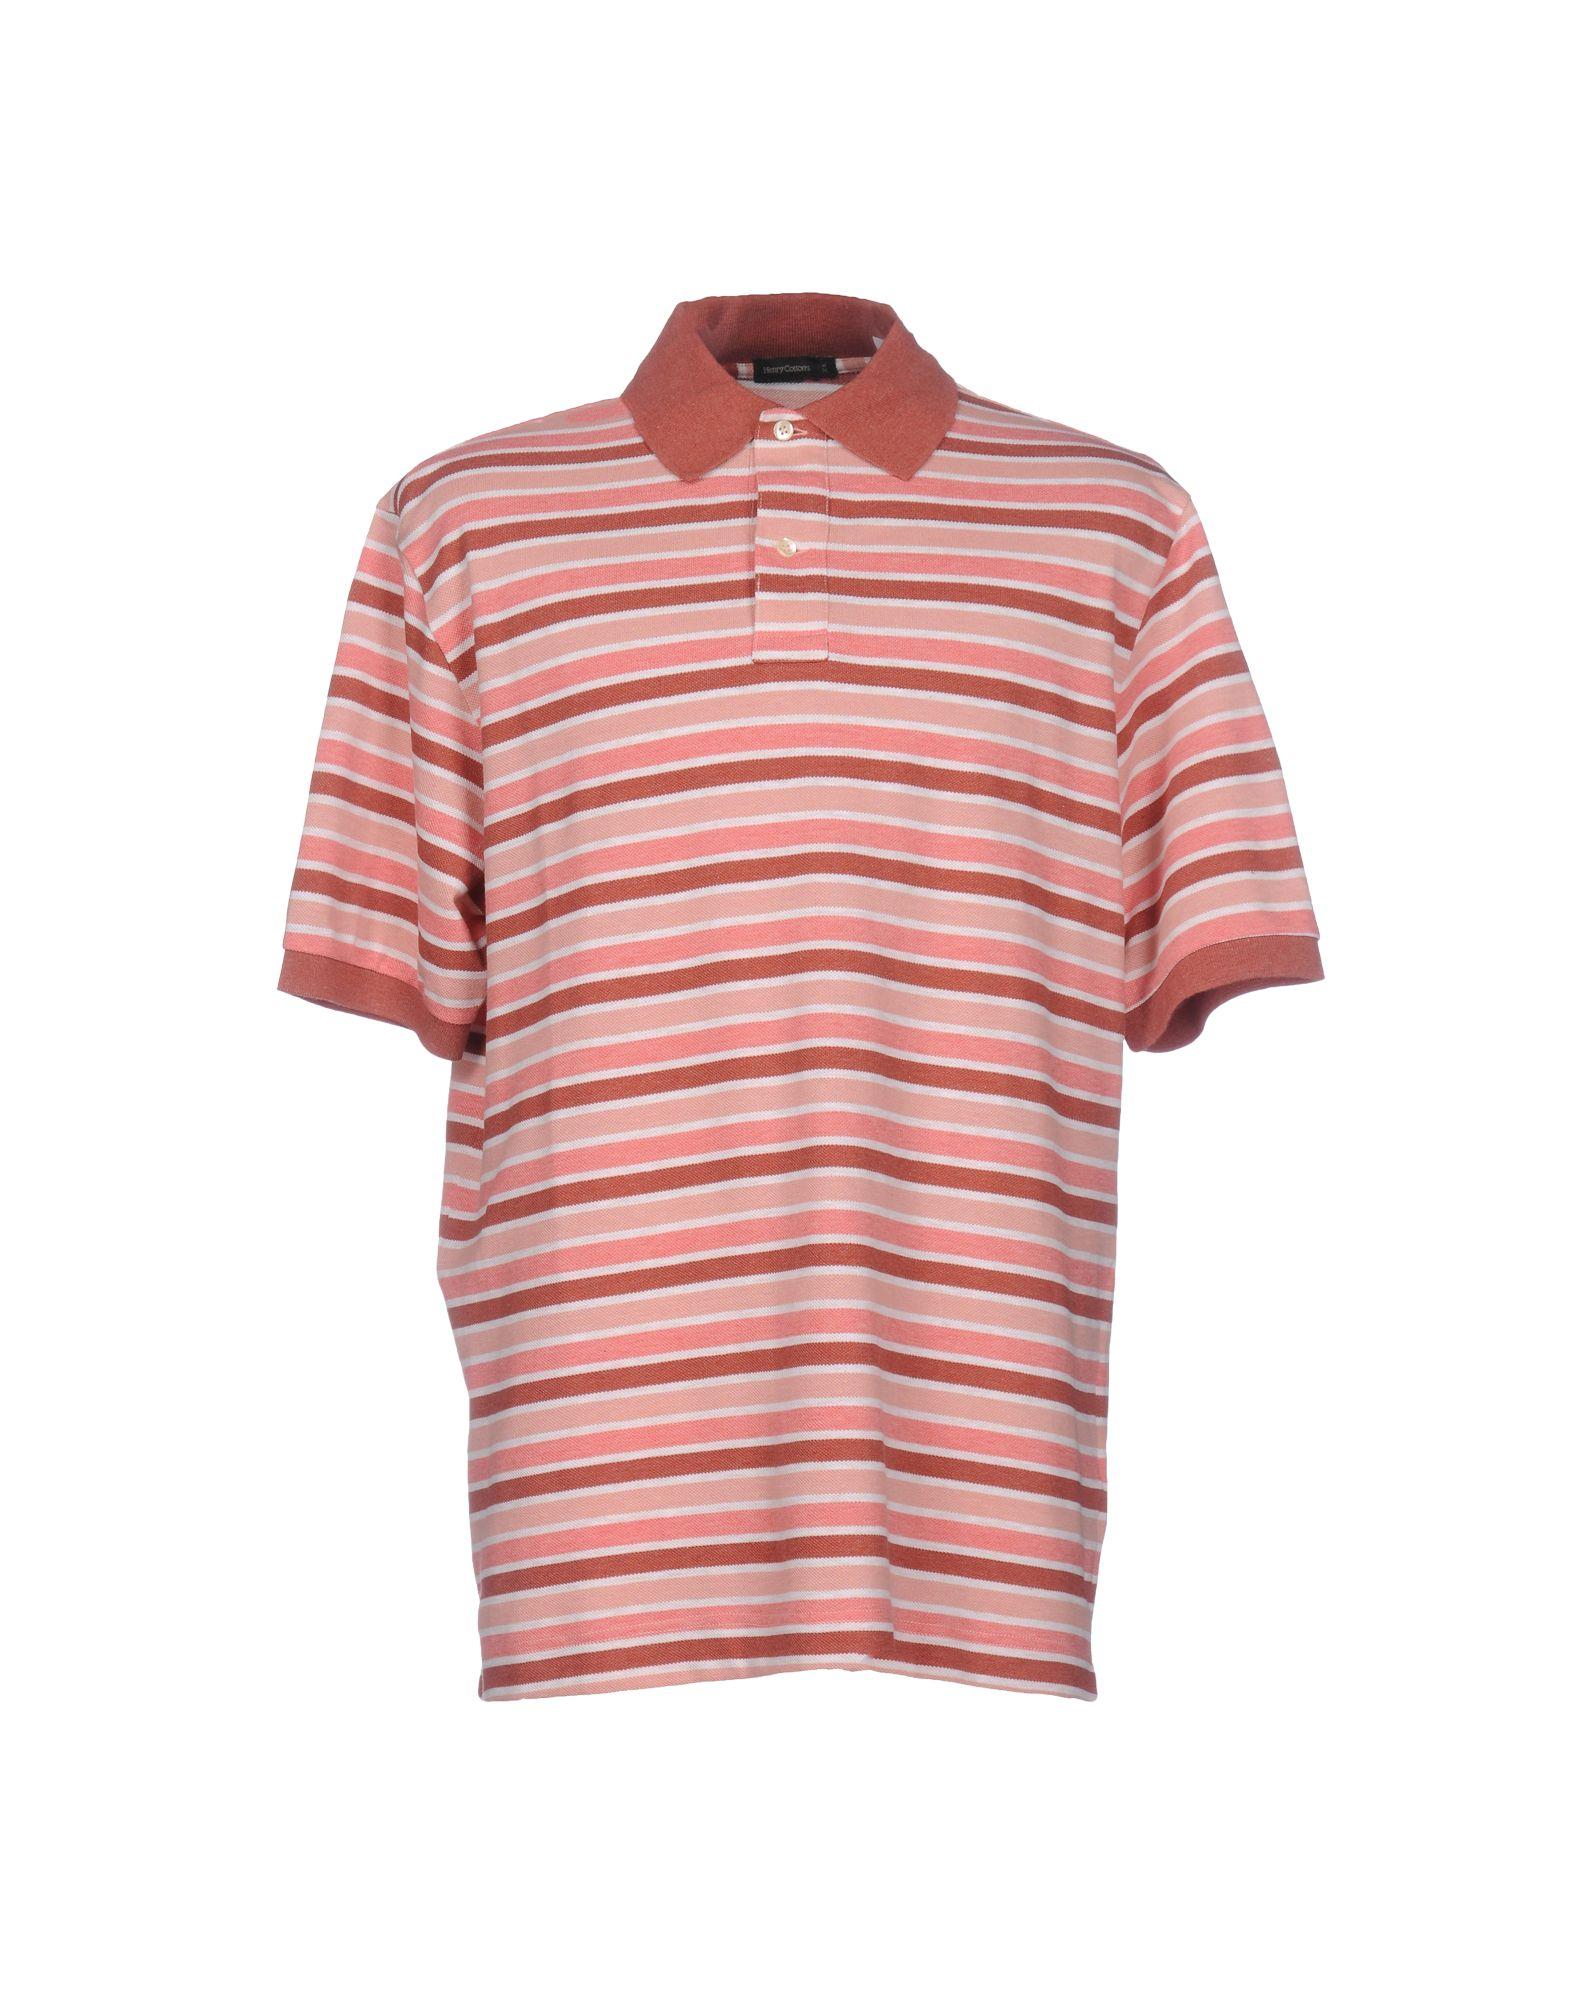 Lyst - Henry cotton's Polo Shirt in Pink for Men